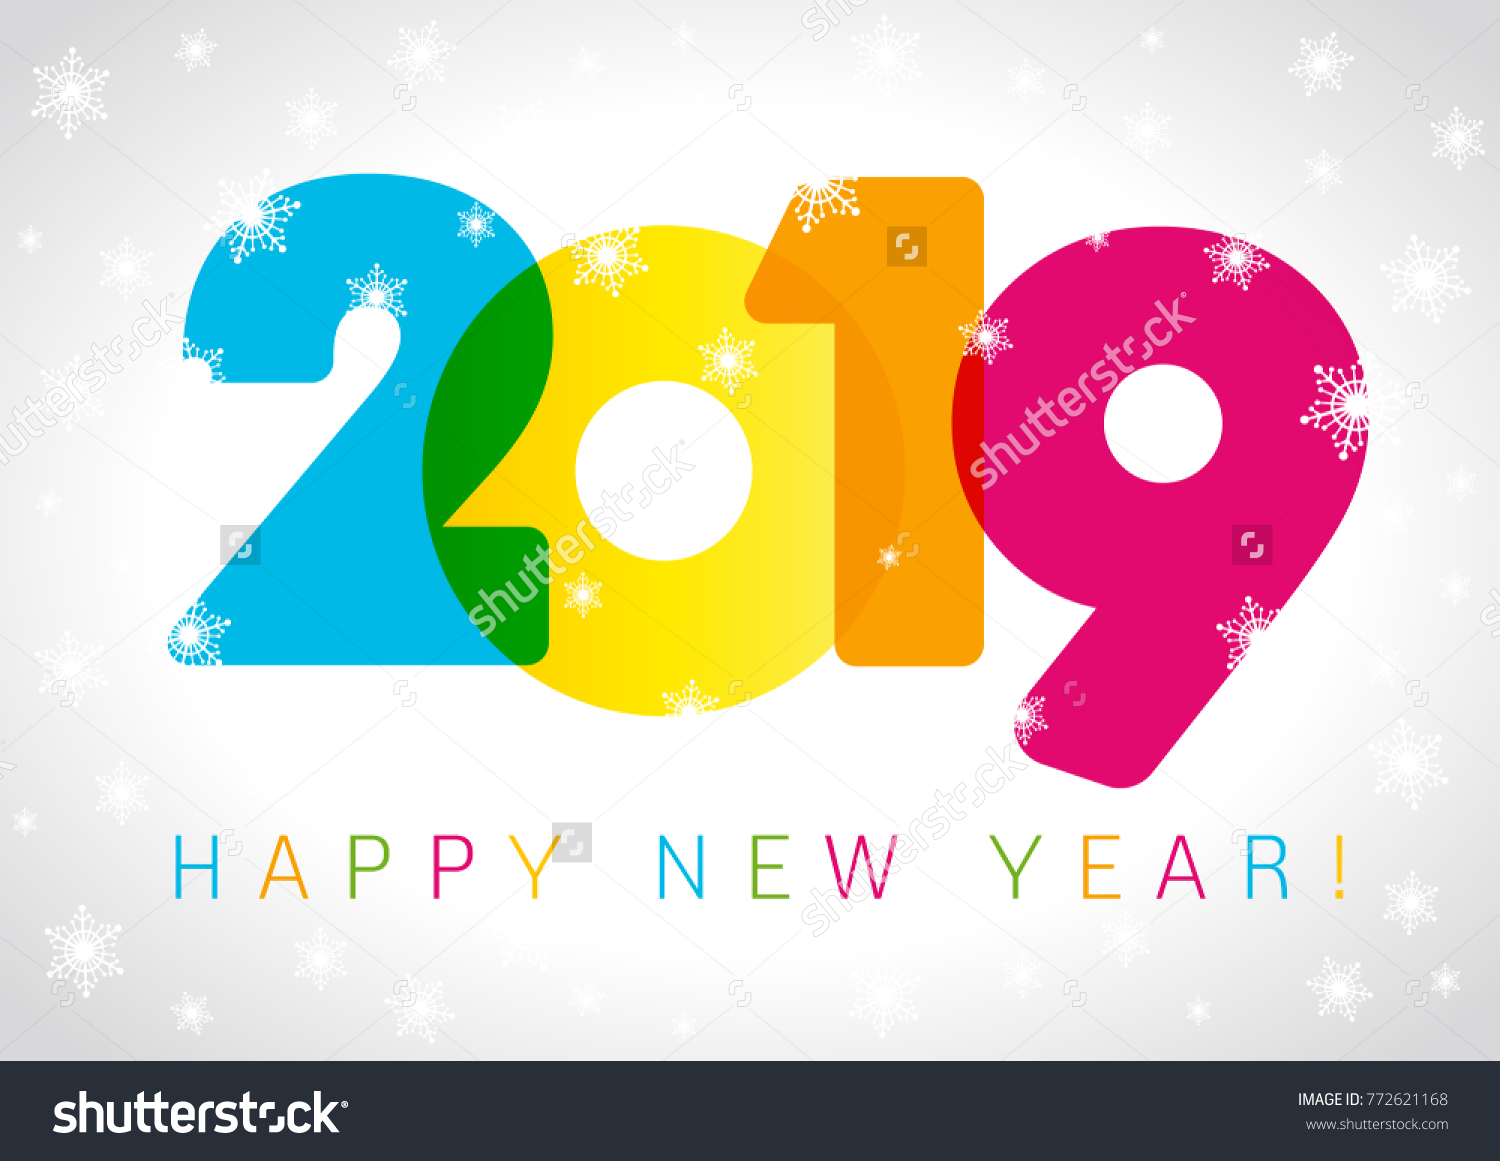 2019 Happy New Year Card Design Stock Vector Royalty Free 772621168